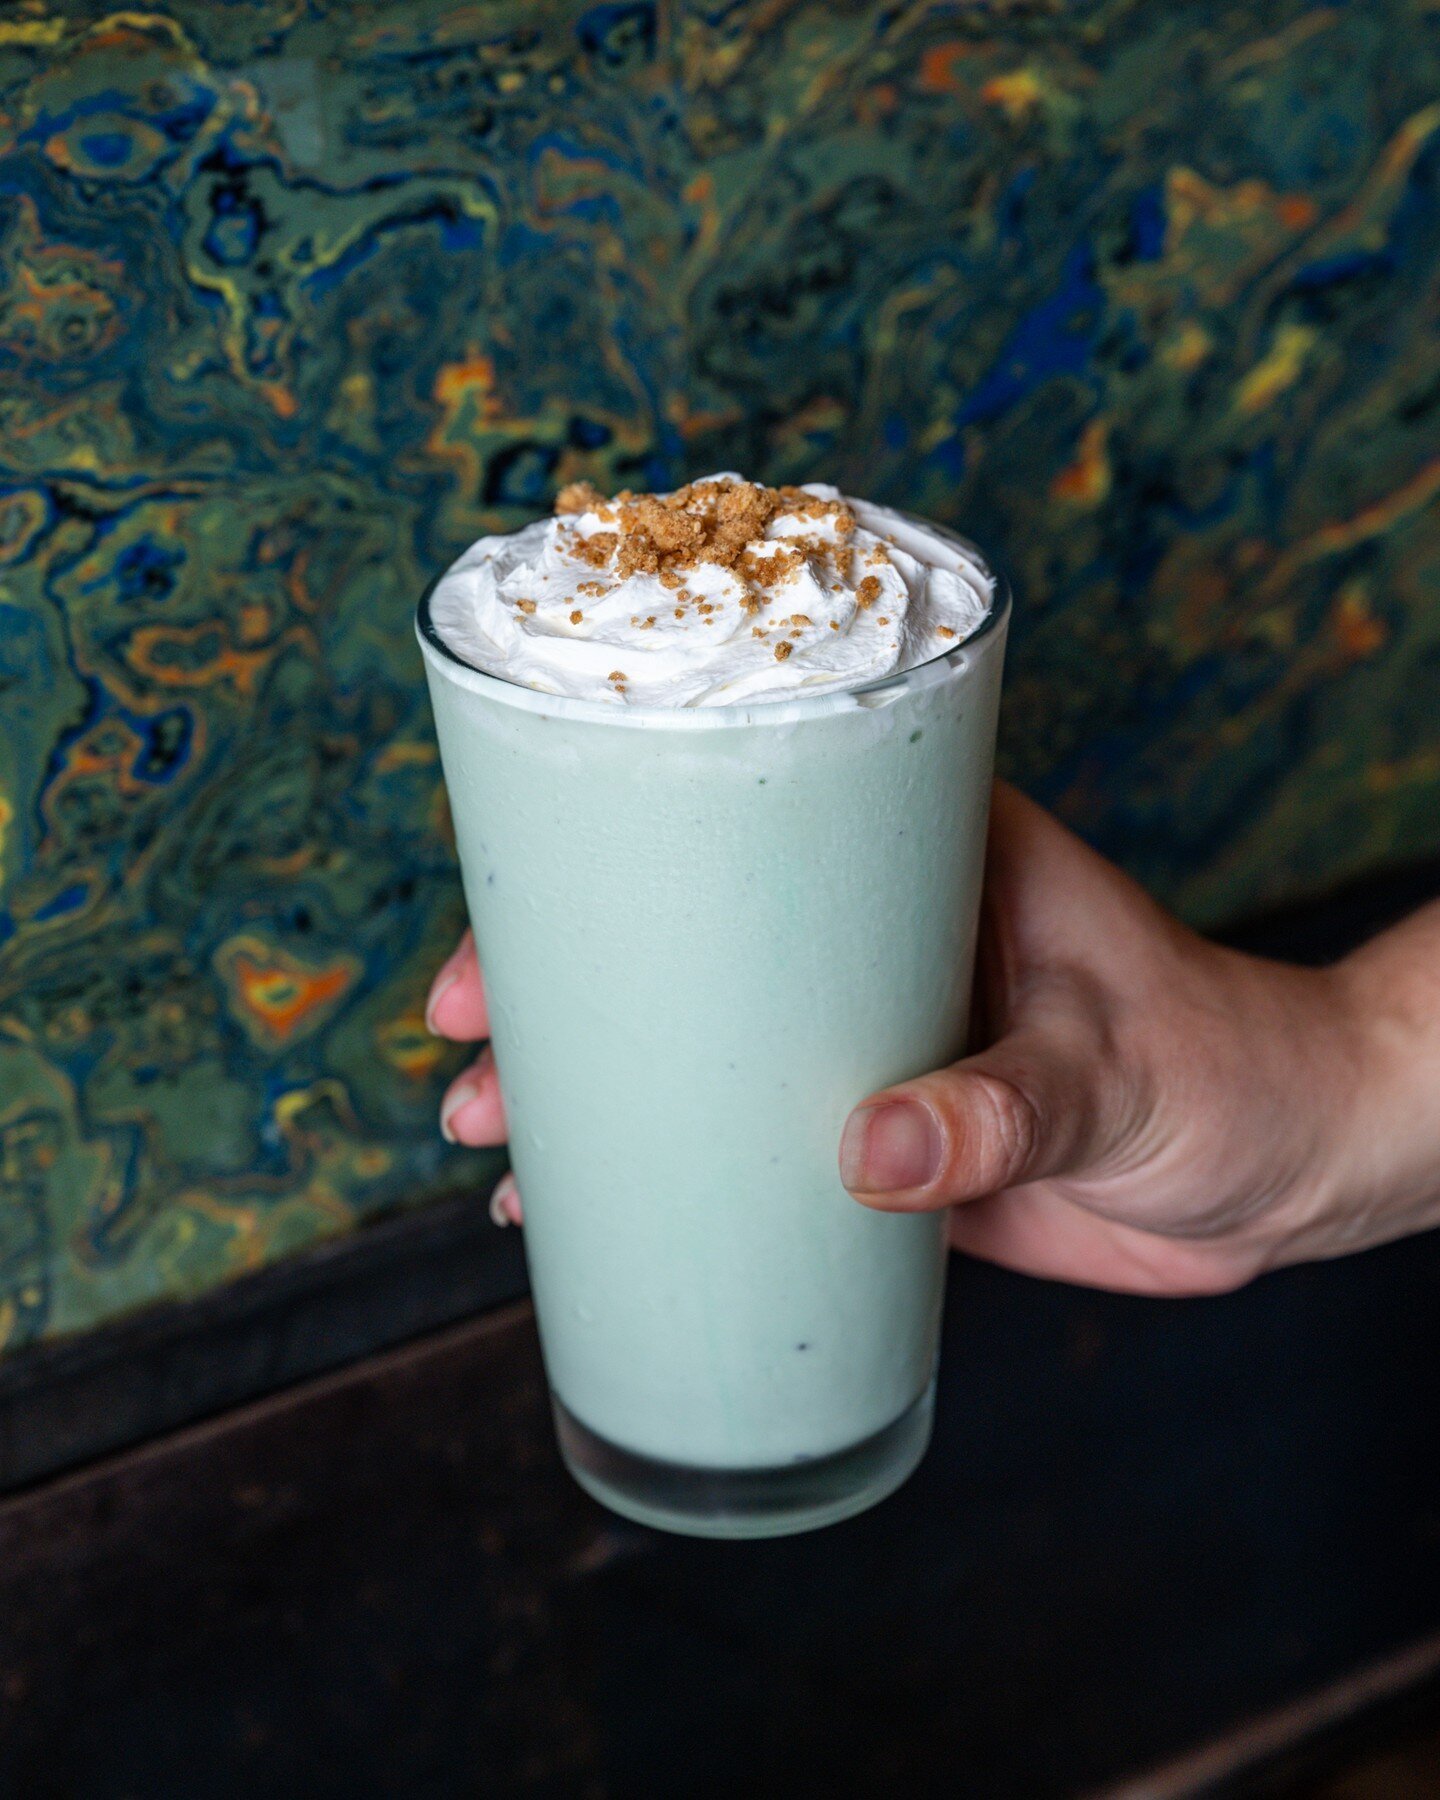 Get your hands on a 𝒁𝒊𝒍𝒌𝒆𝒓 𝑮𝒓𝒂𝒔𝒔𝒉𝒐𝒑𝒑𝒆𝒓 before this #ShakeoftheMonth vanishes &mdash; made with @amysicecream Zilker Mint Chip Ice Cream, Whipped Cream, and a Brown Sugar Graham Cracker Crumble! 🌱🍫

#AmysIceCream #ZilkerMintChip #Gr